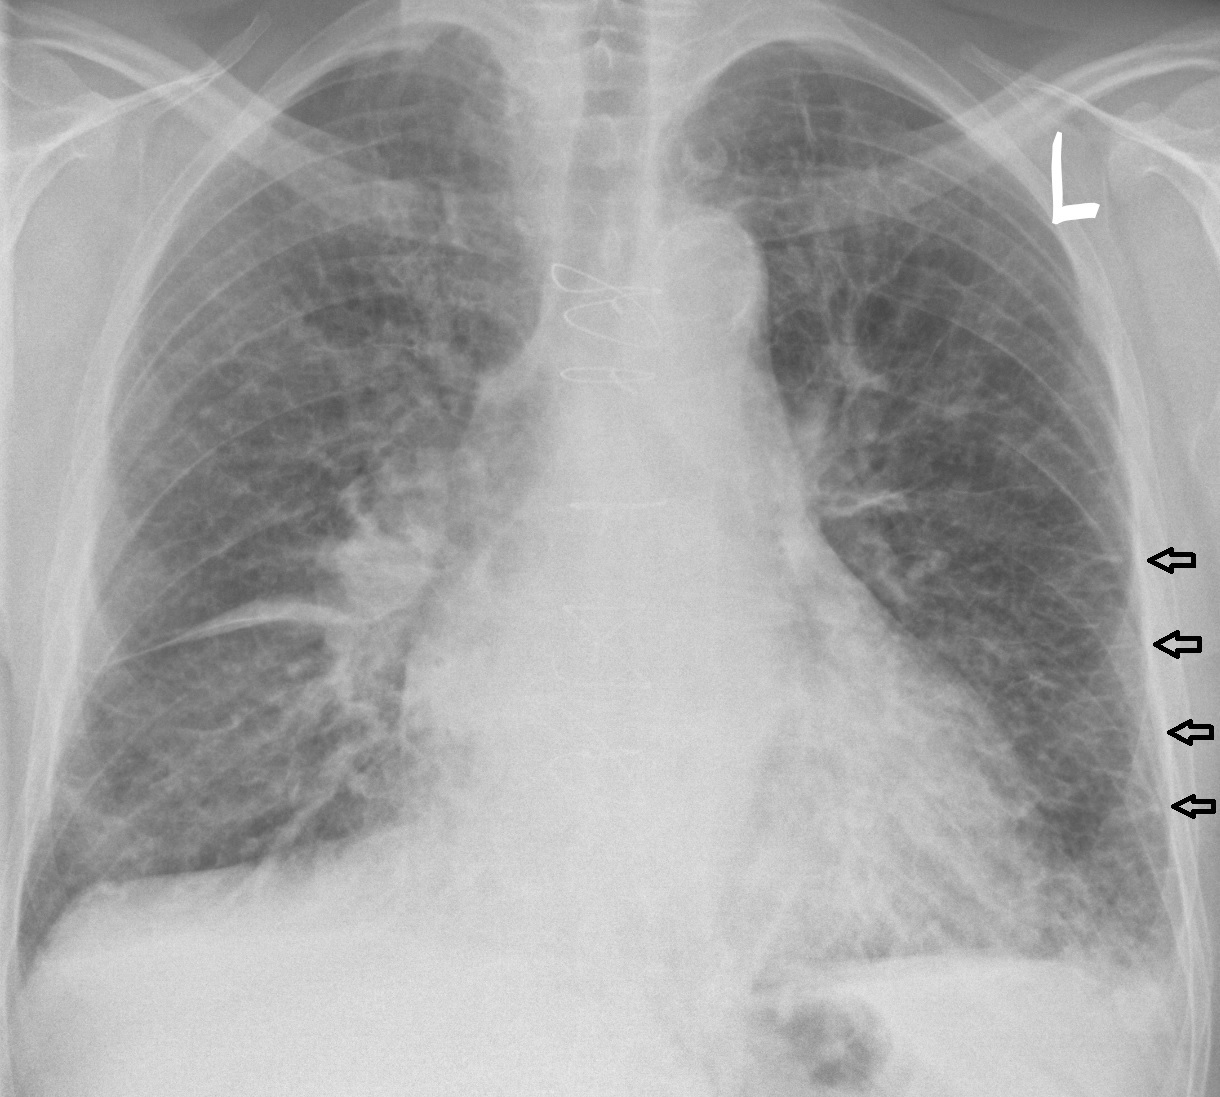 File:InkedChest radiograph of a lung with Kerley B lines - annotated LI.jpg